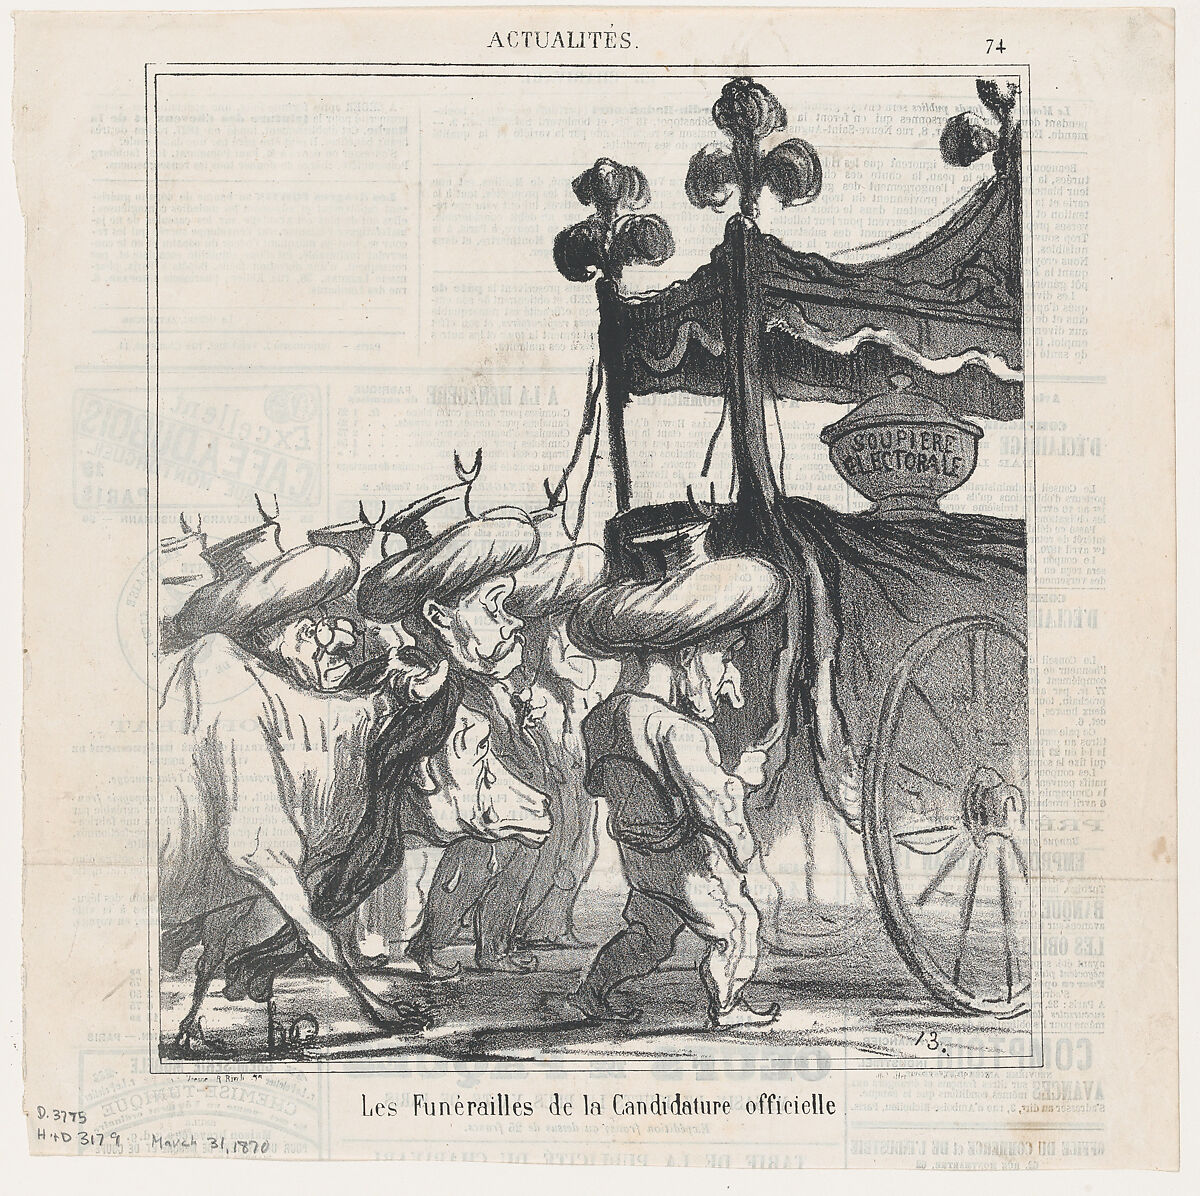 The funeral ceremony for the official candidacy, from 'News of the day,' published in Le Charivari, March 31, 1870, Honoré Daumier (French, Marseilles 1808–1879 Valmondois), Lithograph on newsprint 